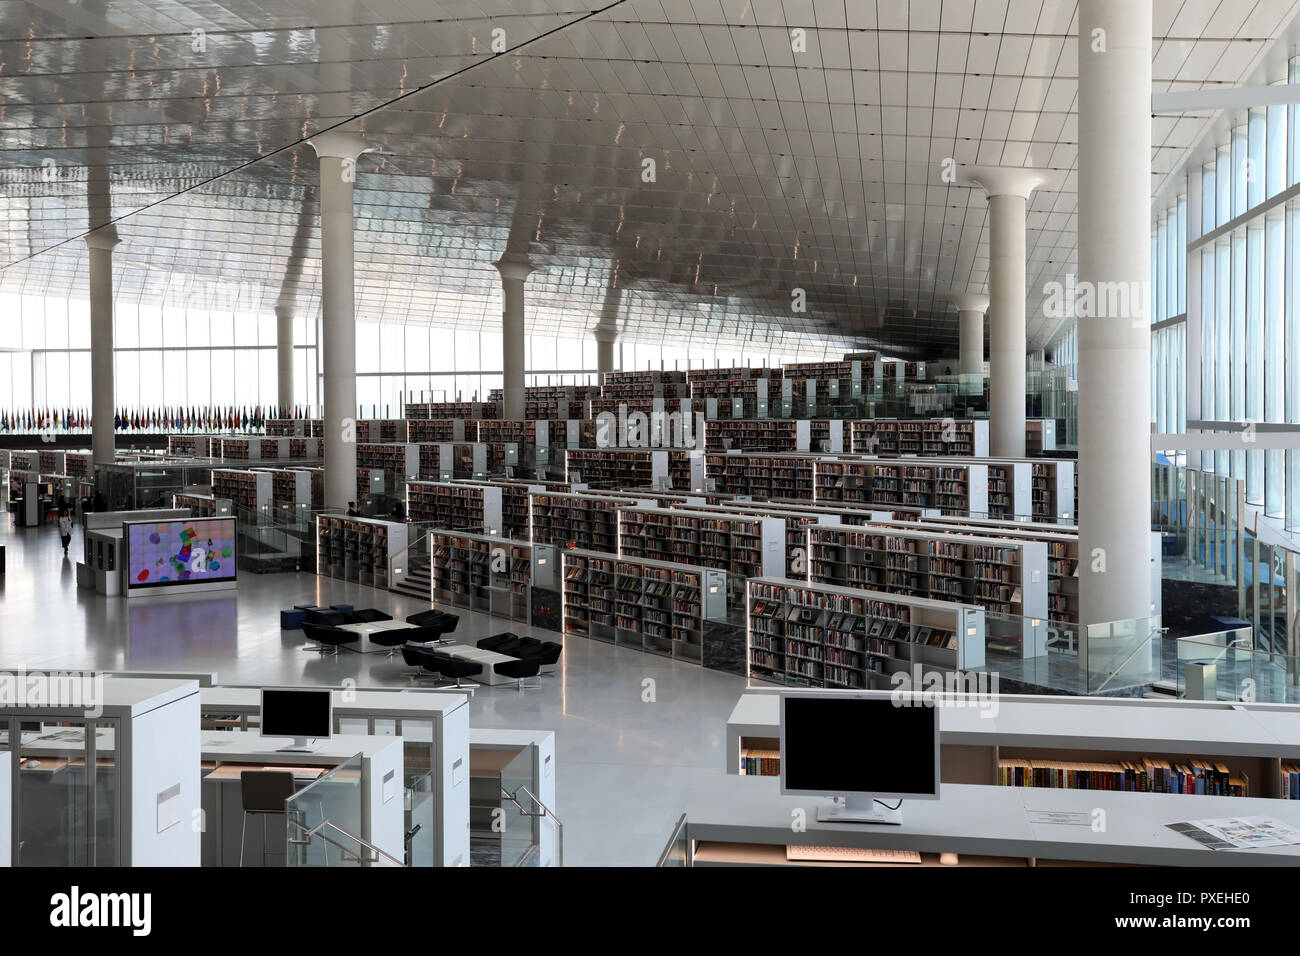 Doha / Qatar – October 9, 2018: Interior of the National Library of Qatar, designed by Dutch architect Rem Koolhaas, in the Qatari capital Doha Stock Photo